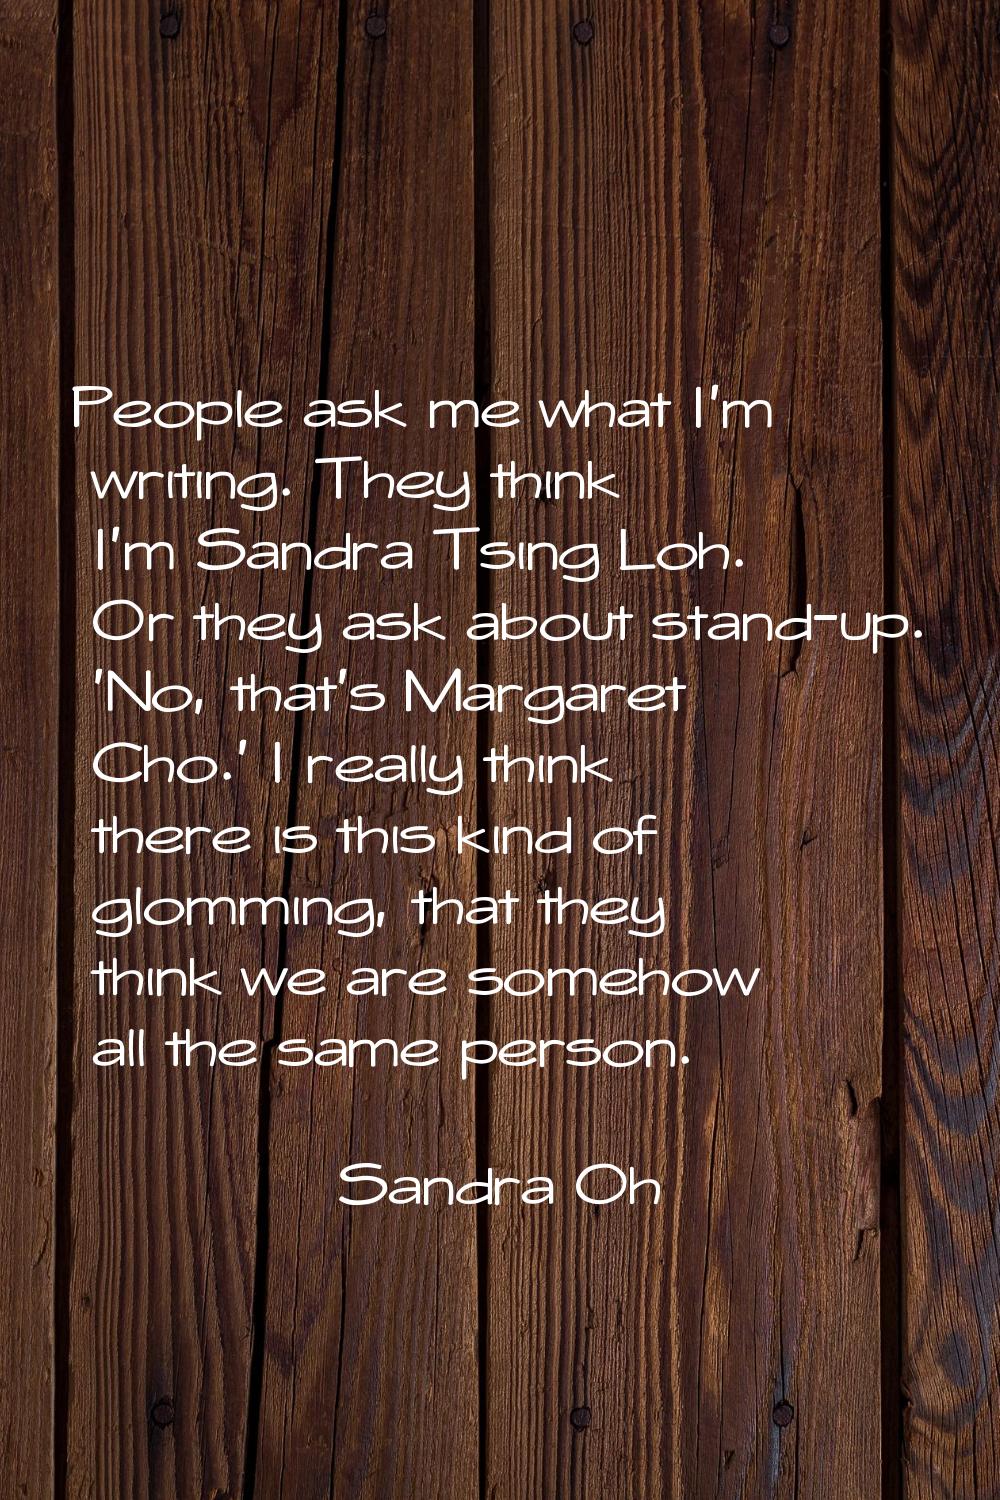 People ask me what I'm writing. They think I'm Sandra Tsing Loh. Or they ask about stand-up. 'No, t